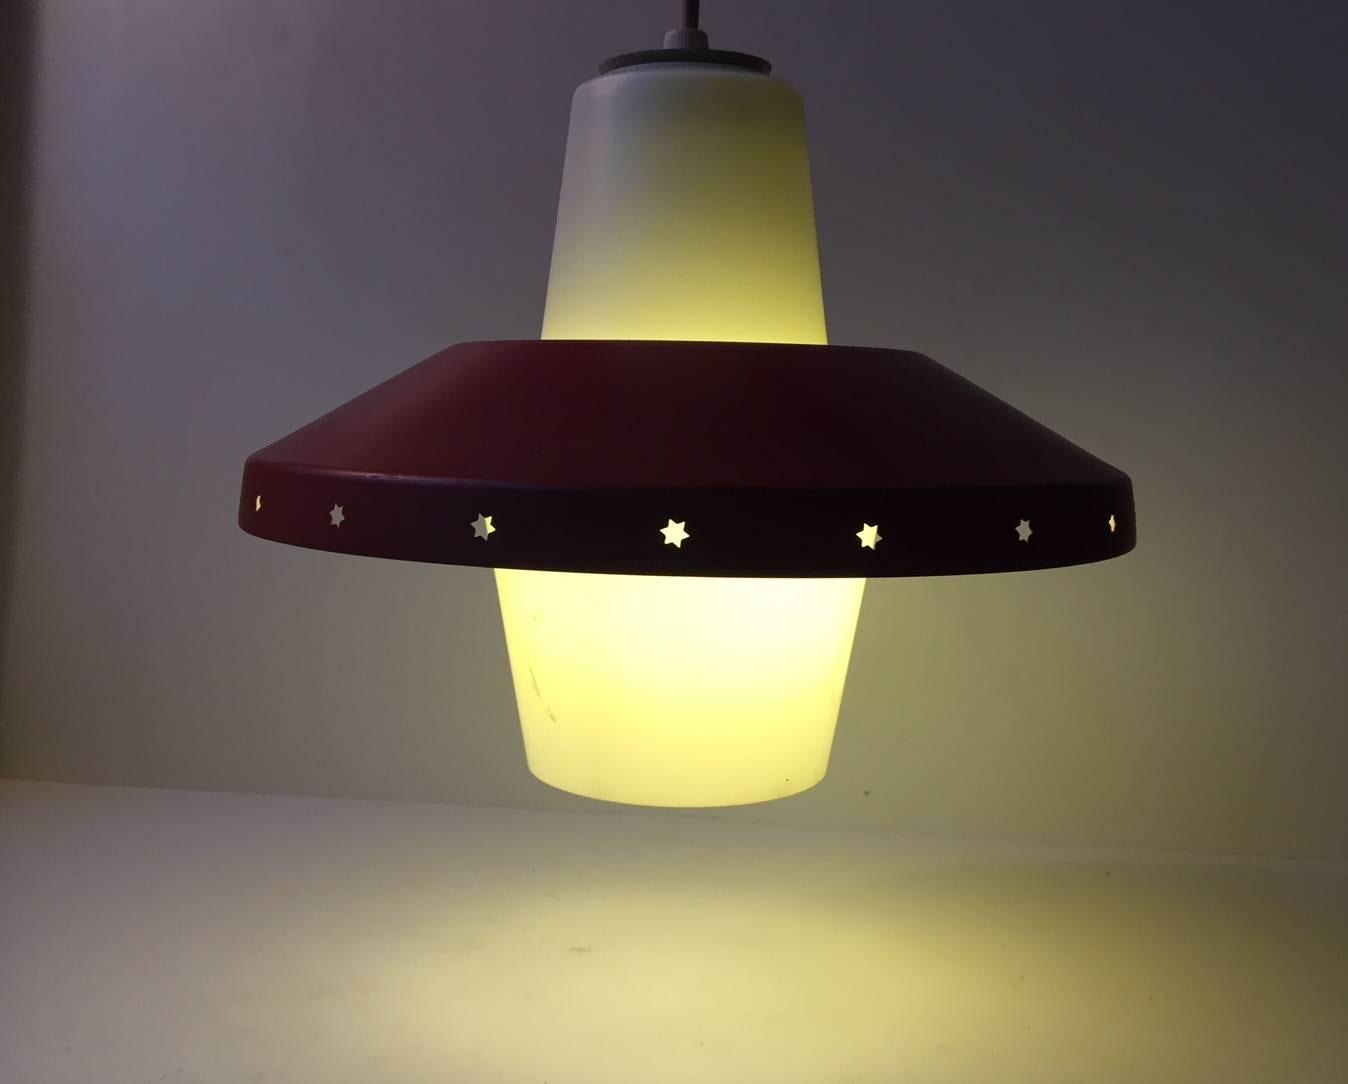 Mid-20th Century Vintage Danish Modernist 'Star' Ceiling Pendant by Bent Karlby for Lyfa, 1950s